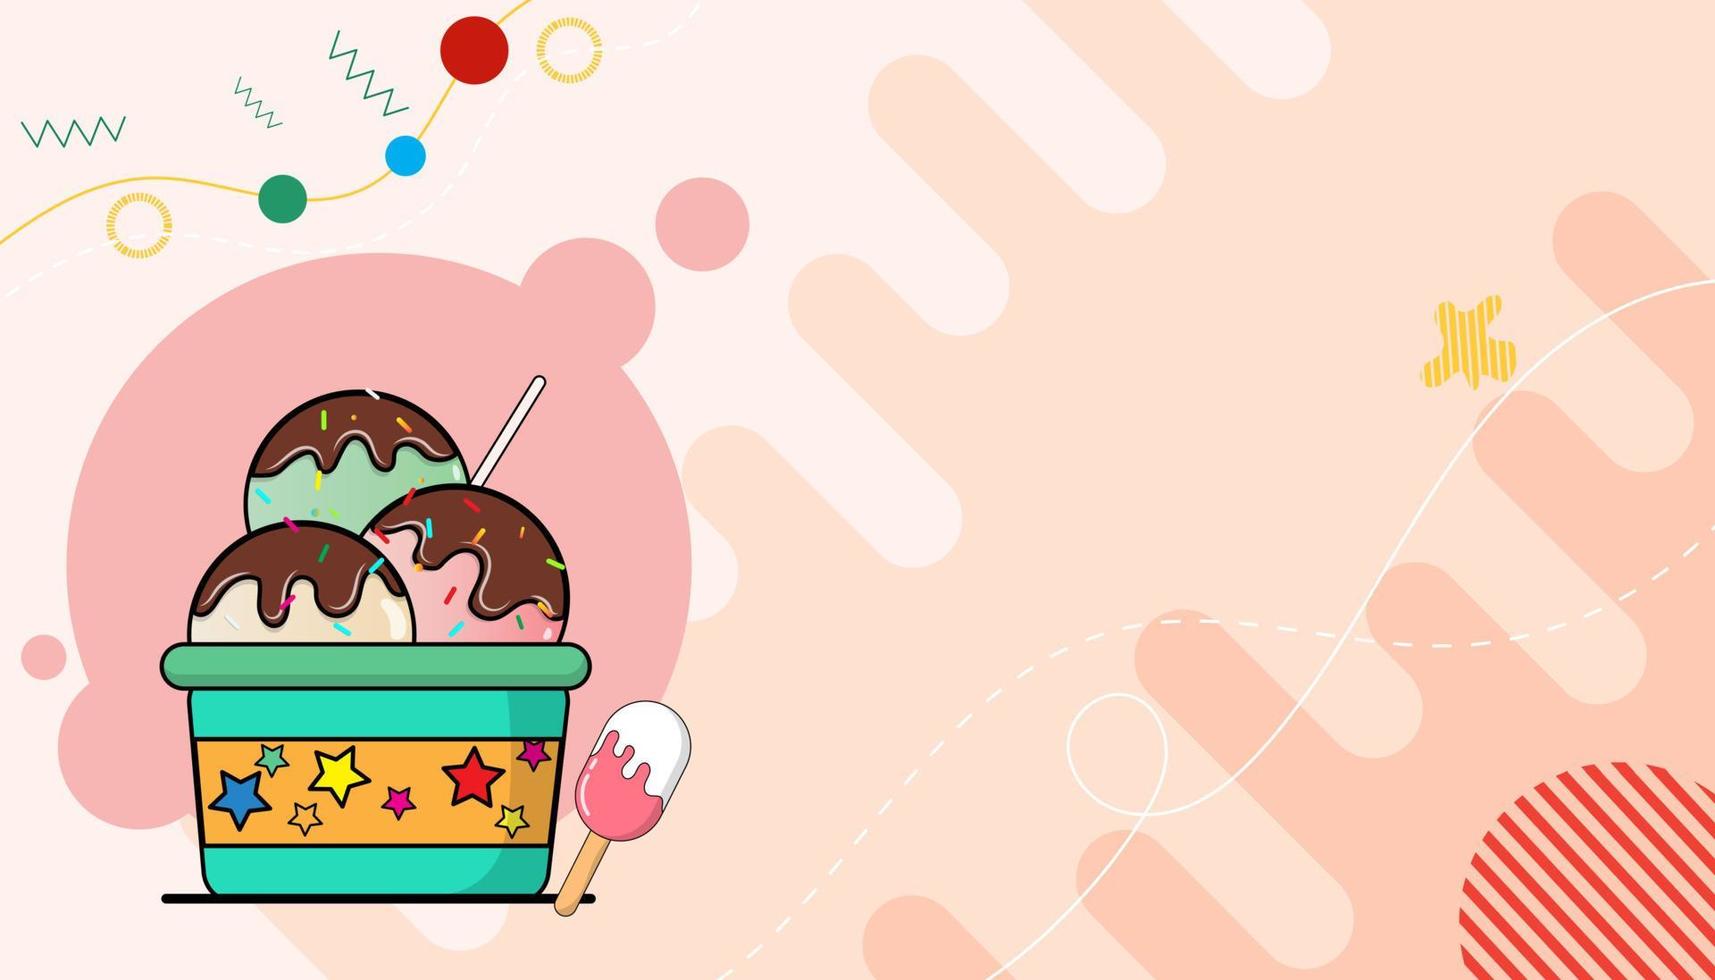 Strawberry, vanilla, melon flavored ice cream topped with chocolate in a cup on a pink background. vector